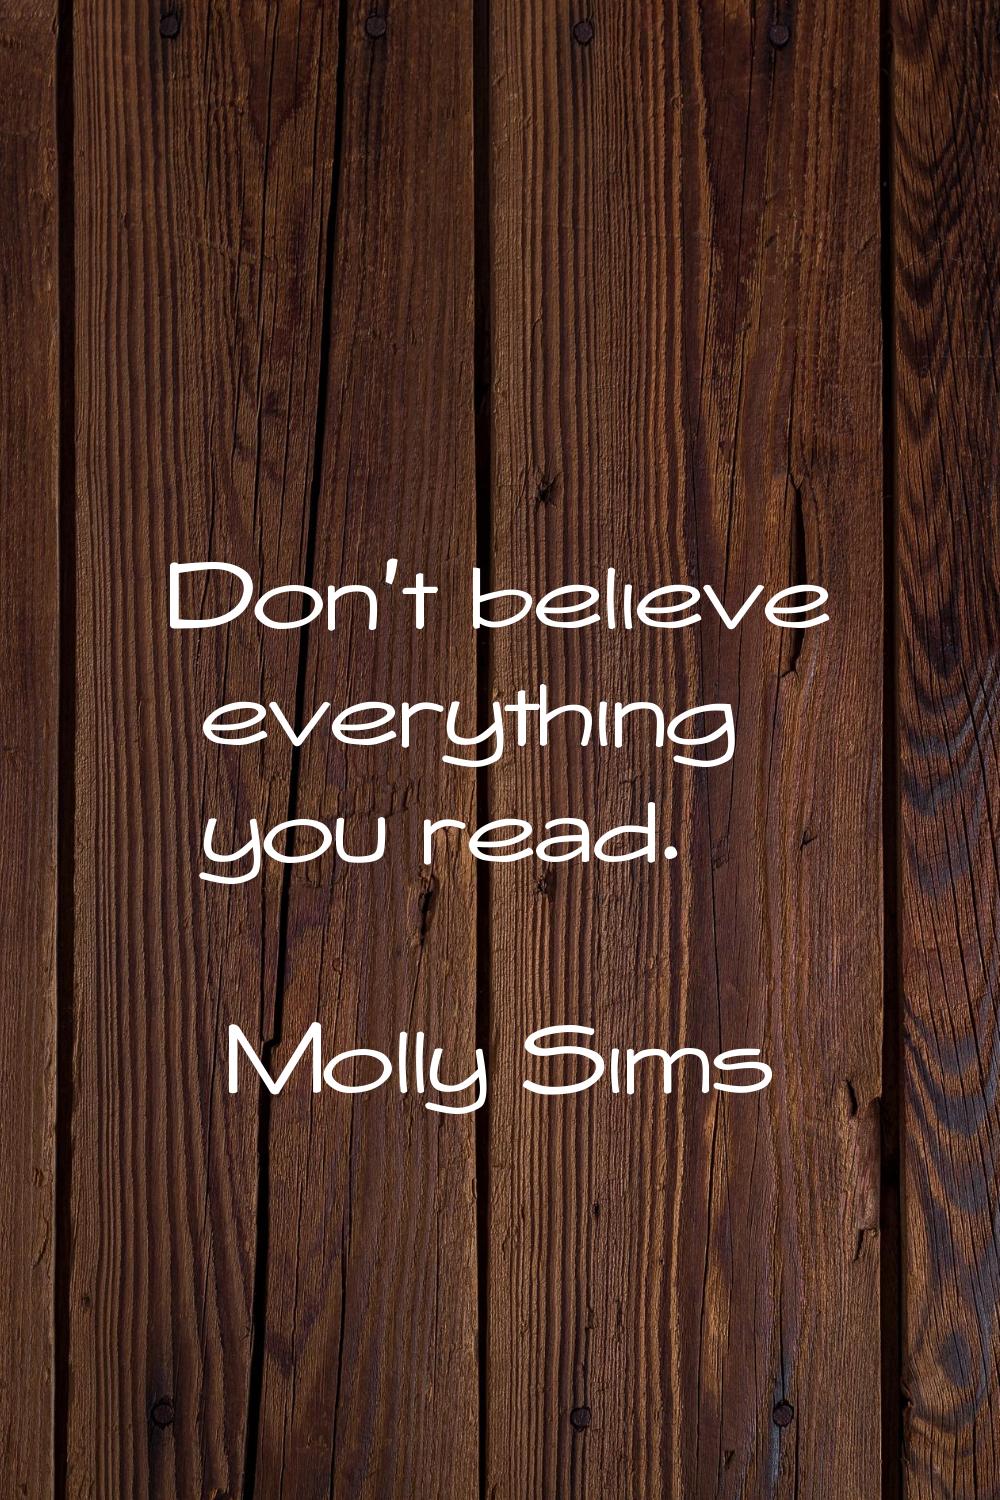 Don't believe everything you read.